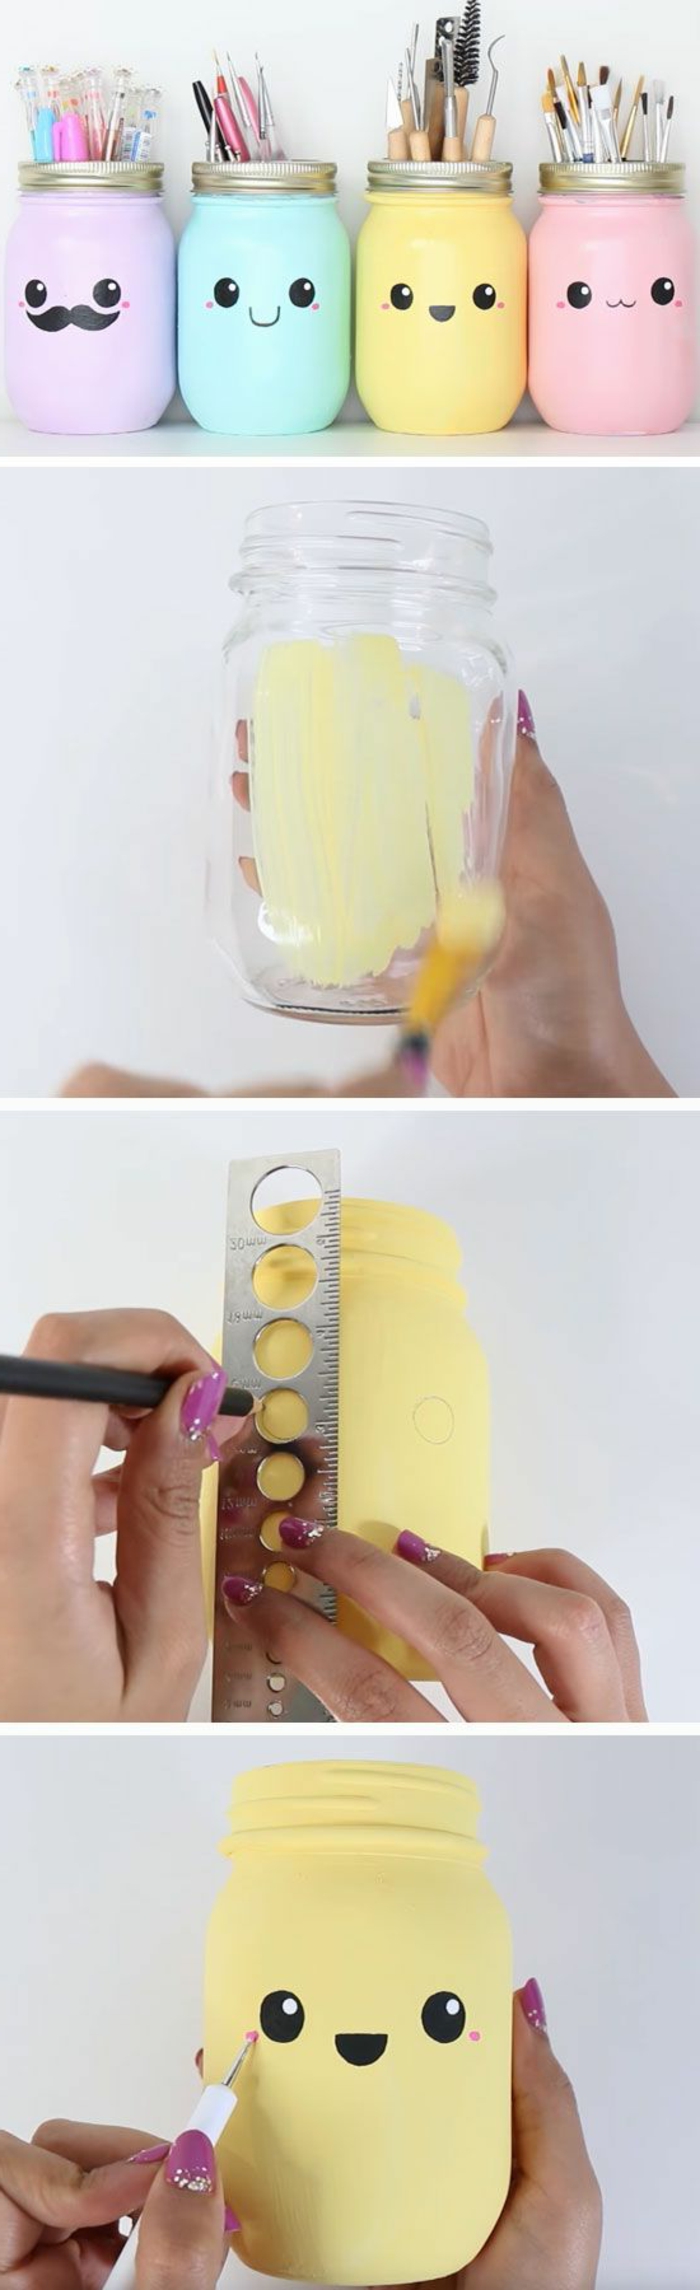 four mason jars, painted in pastel colors, pale purple and blue, yellow and pink, decorated with hand-drawn caroon faces, fun and easy crafts, making of process in three photos